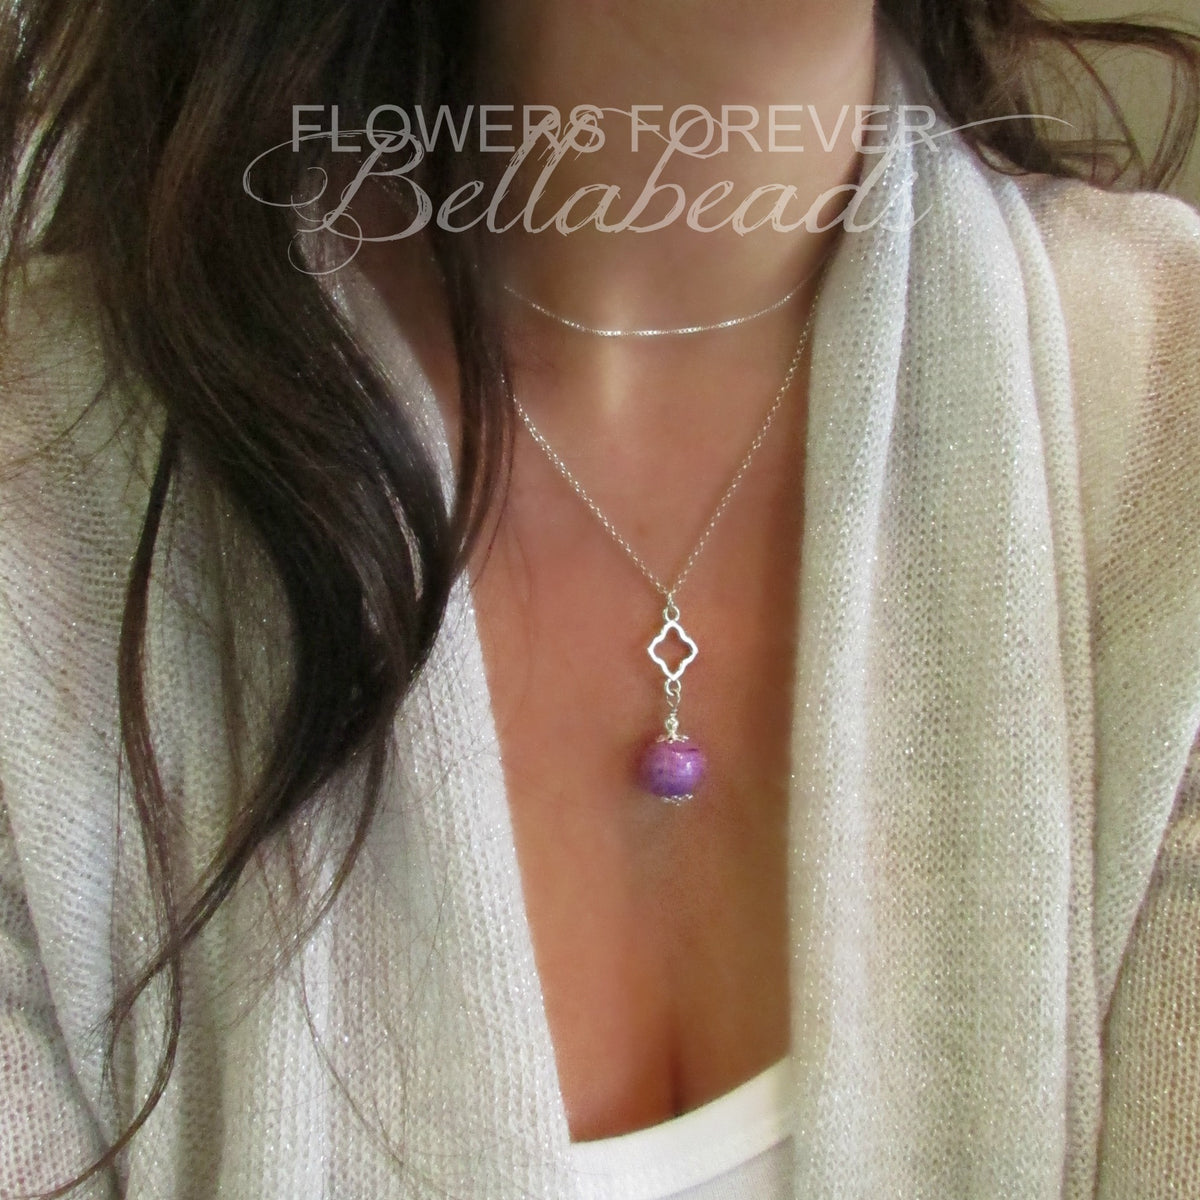 Memorial Jewelry made from Flower Petals, Jewelry Clover Necklace Pendant